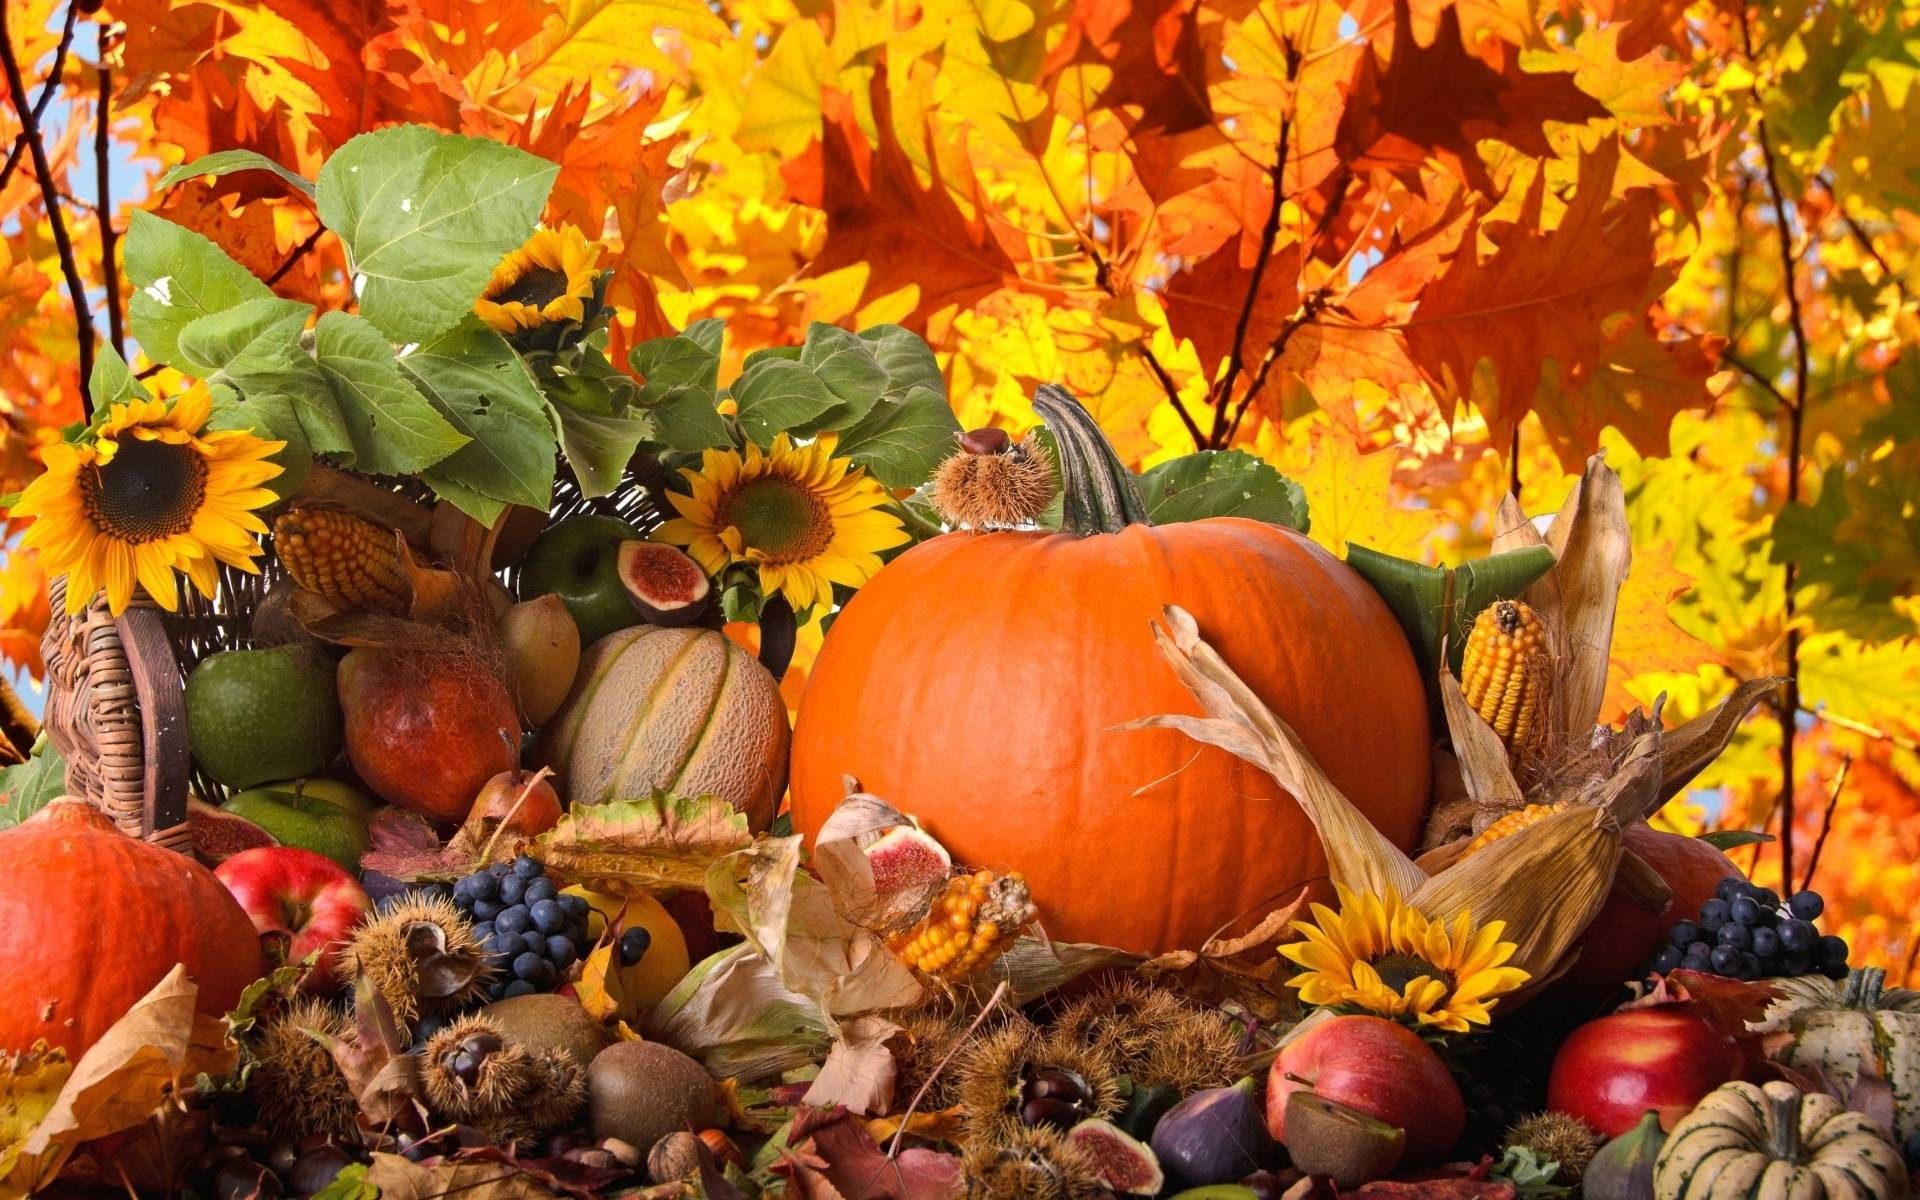 A pile of fruits and vegetables with fall leaves - Thanksgiving